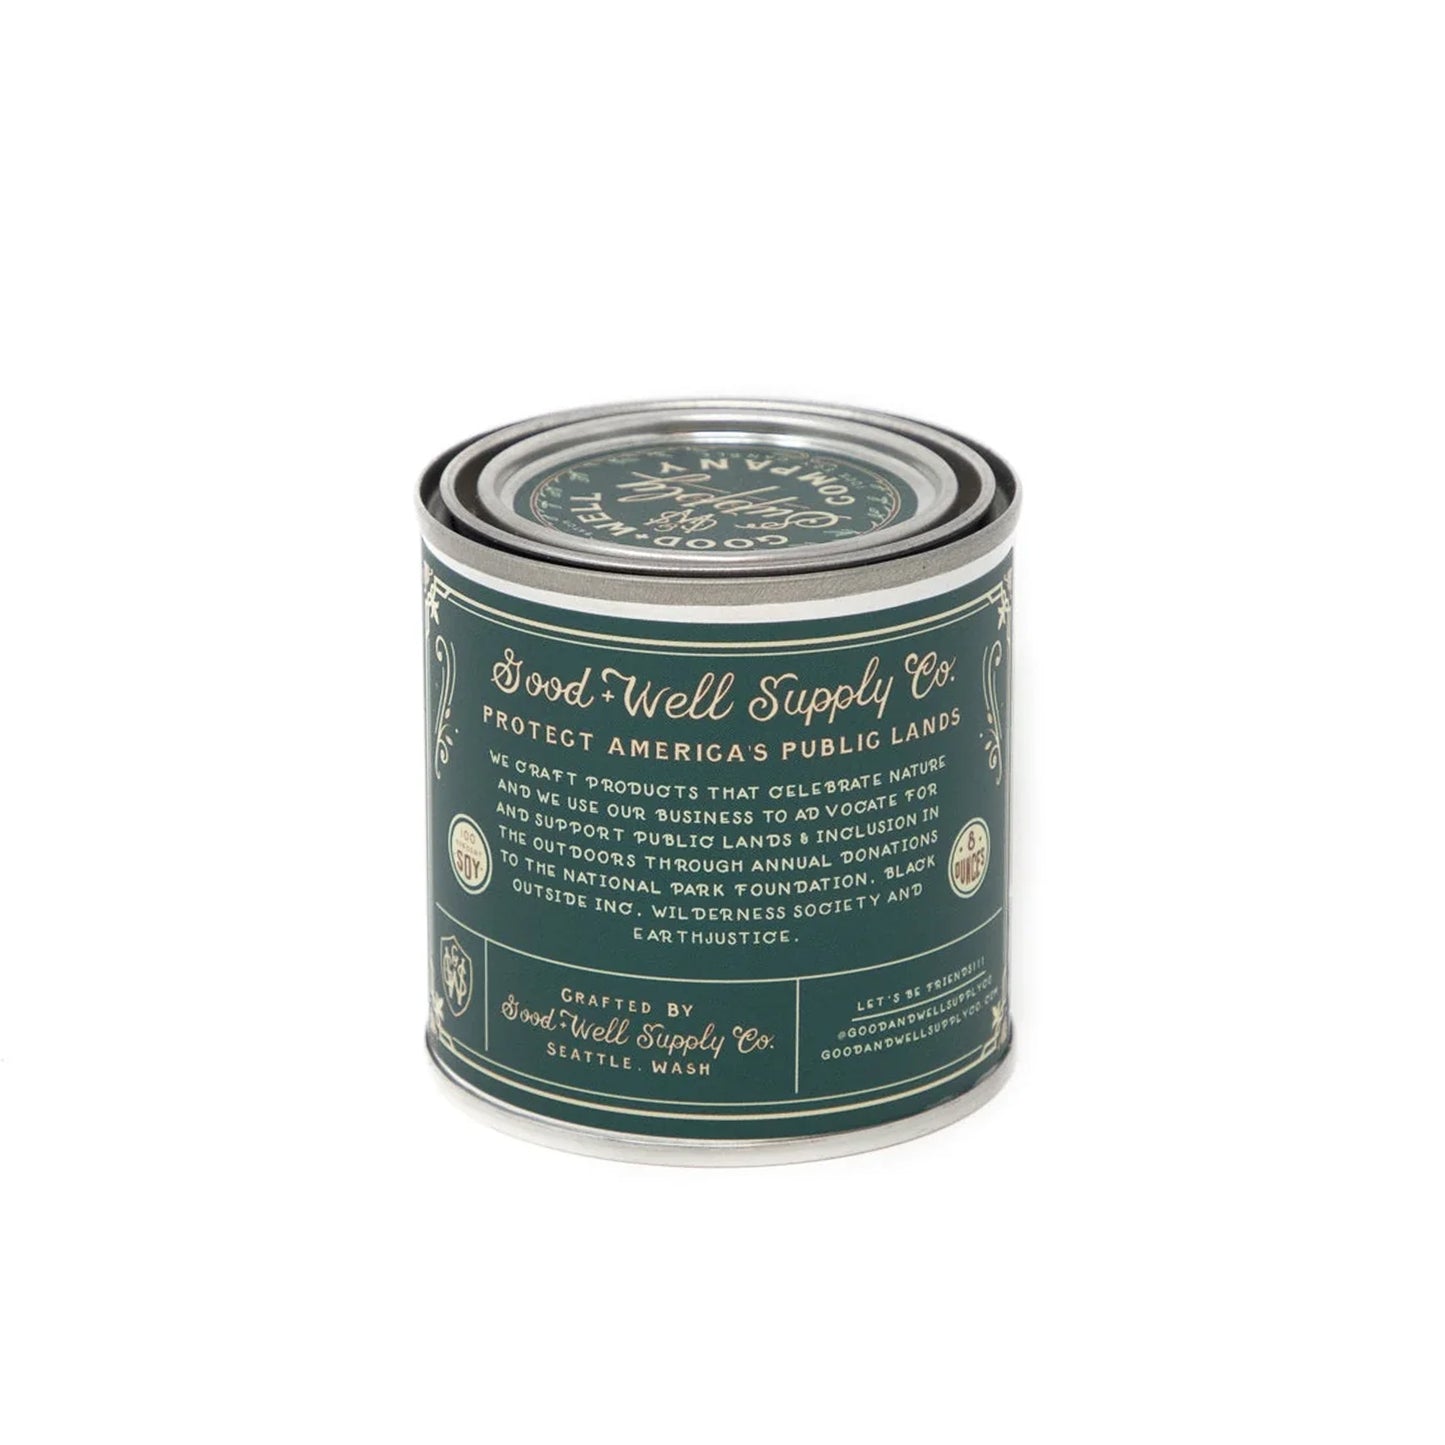 National Scenic Trails Candle 8oz / Pacific Northwest